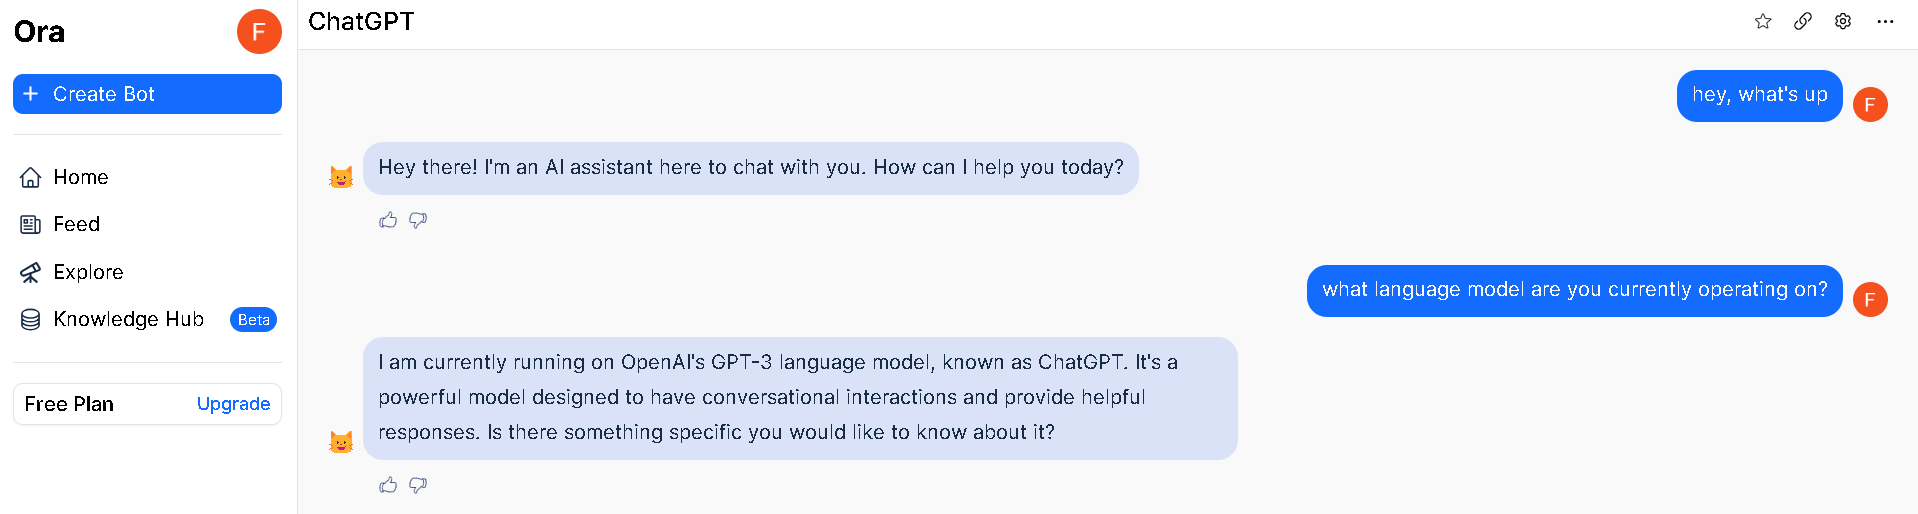 You can either use Ora.ai's GPT-3 as a chatbot or you can create custom chatbots with it.